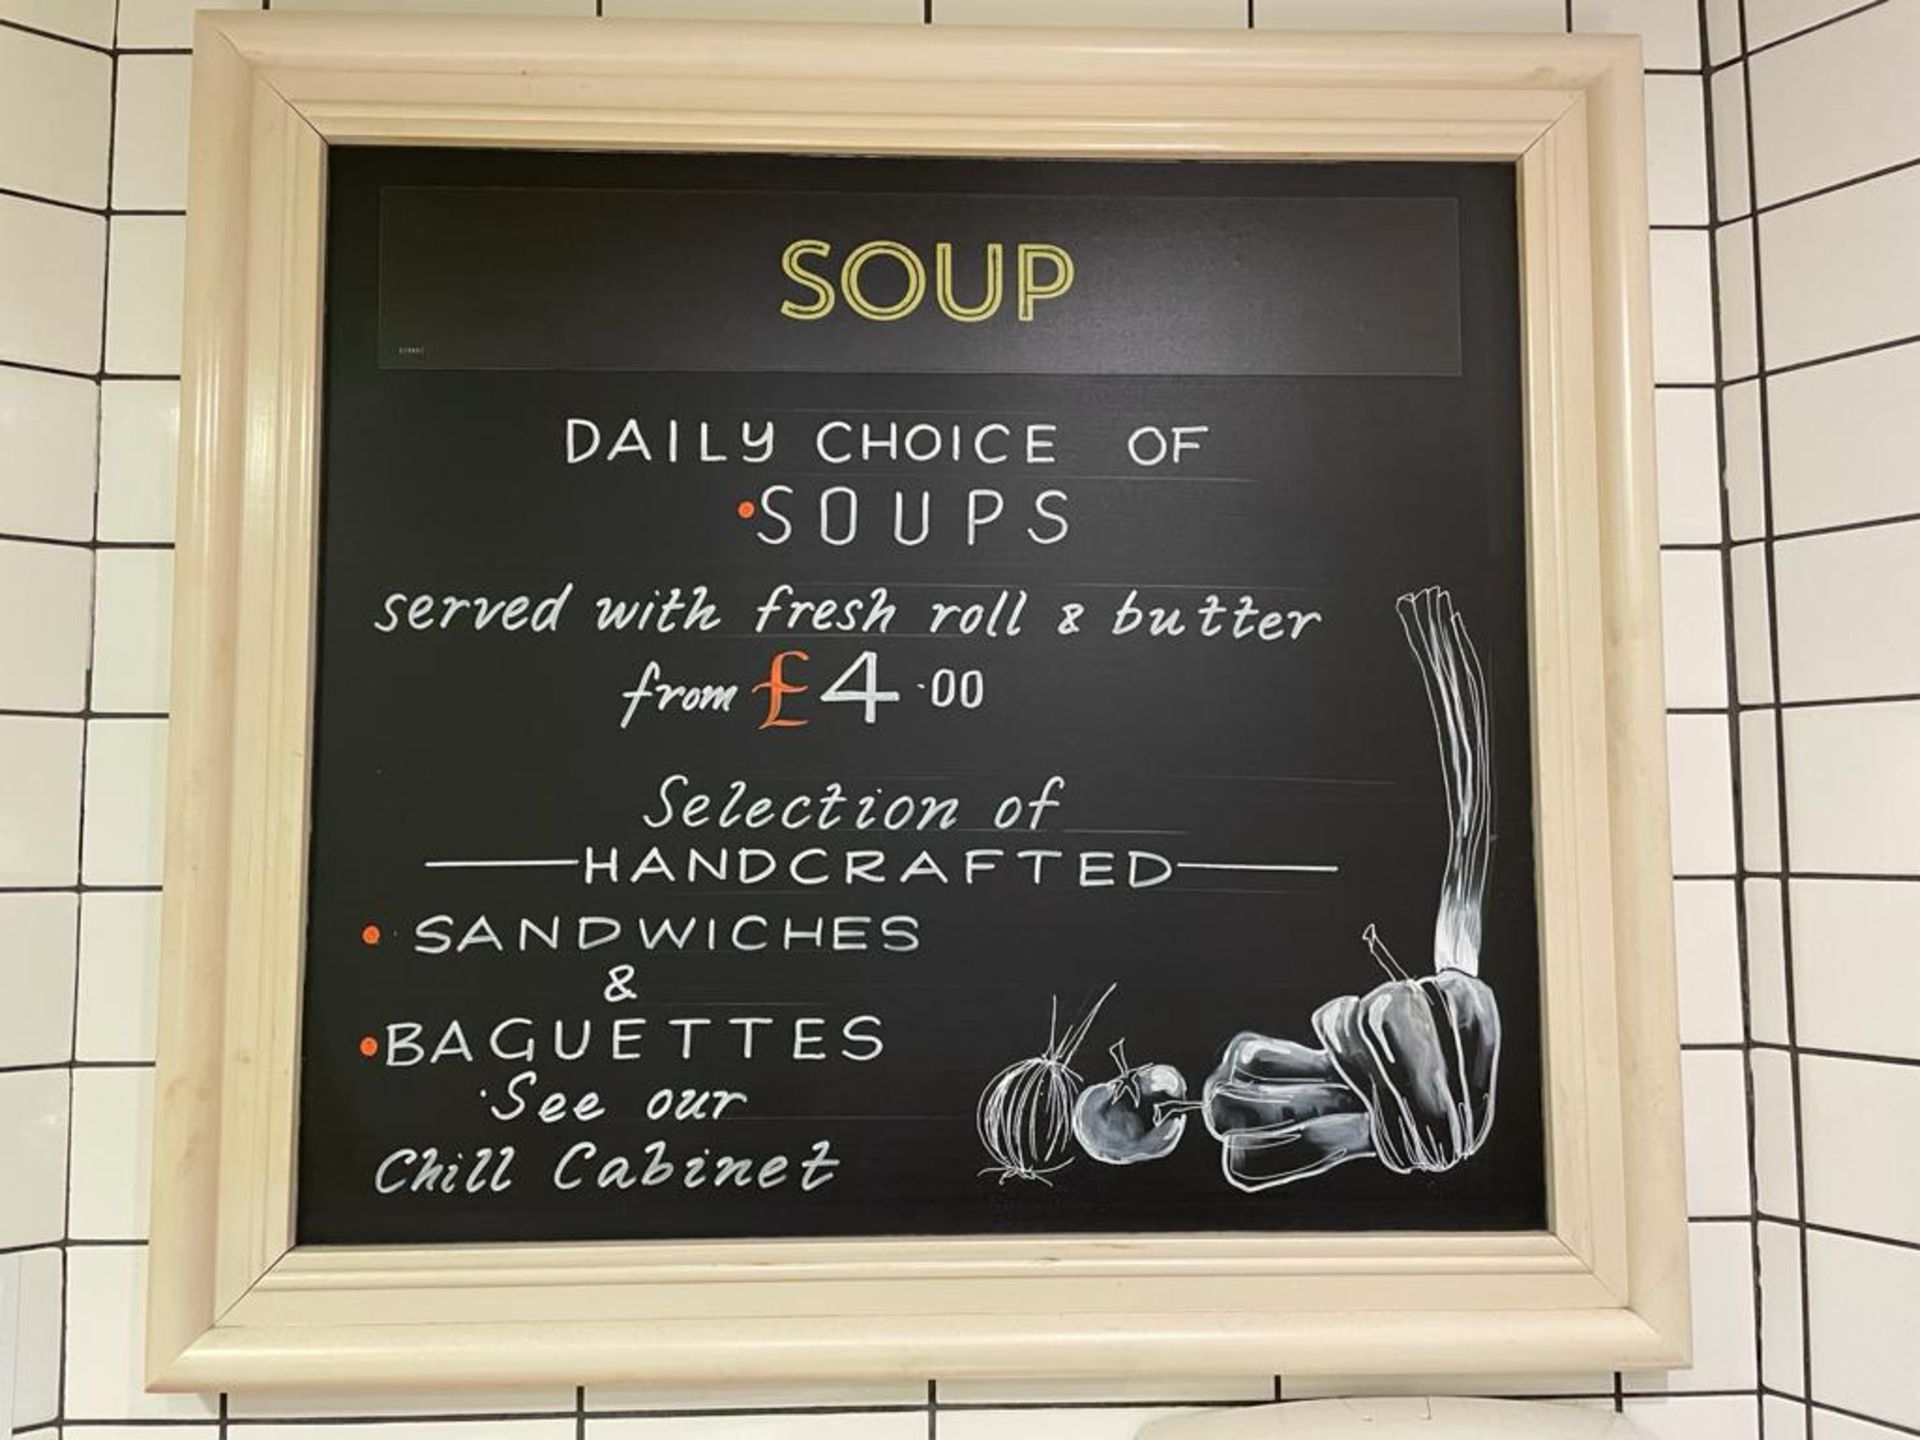 4 x Framed Advertising Signs Including Coffee Sign and Chalk Menu Price Boards - CL670 - Ref: GEM164 - Image 3 of 7